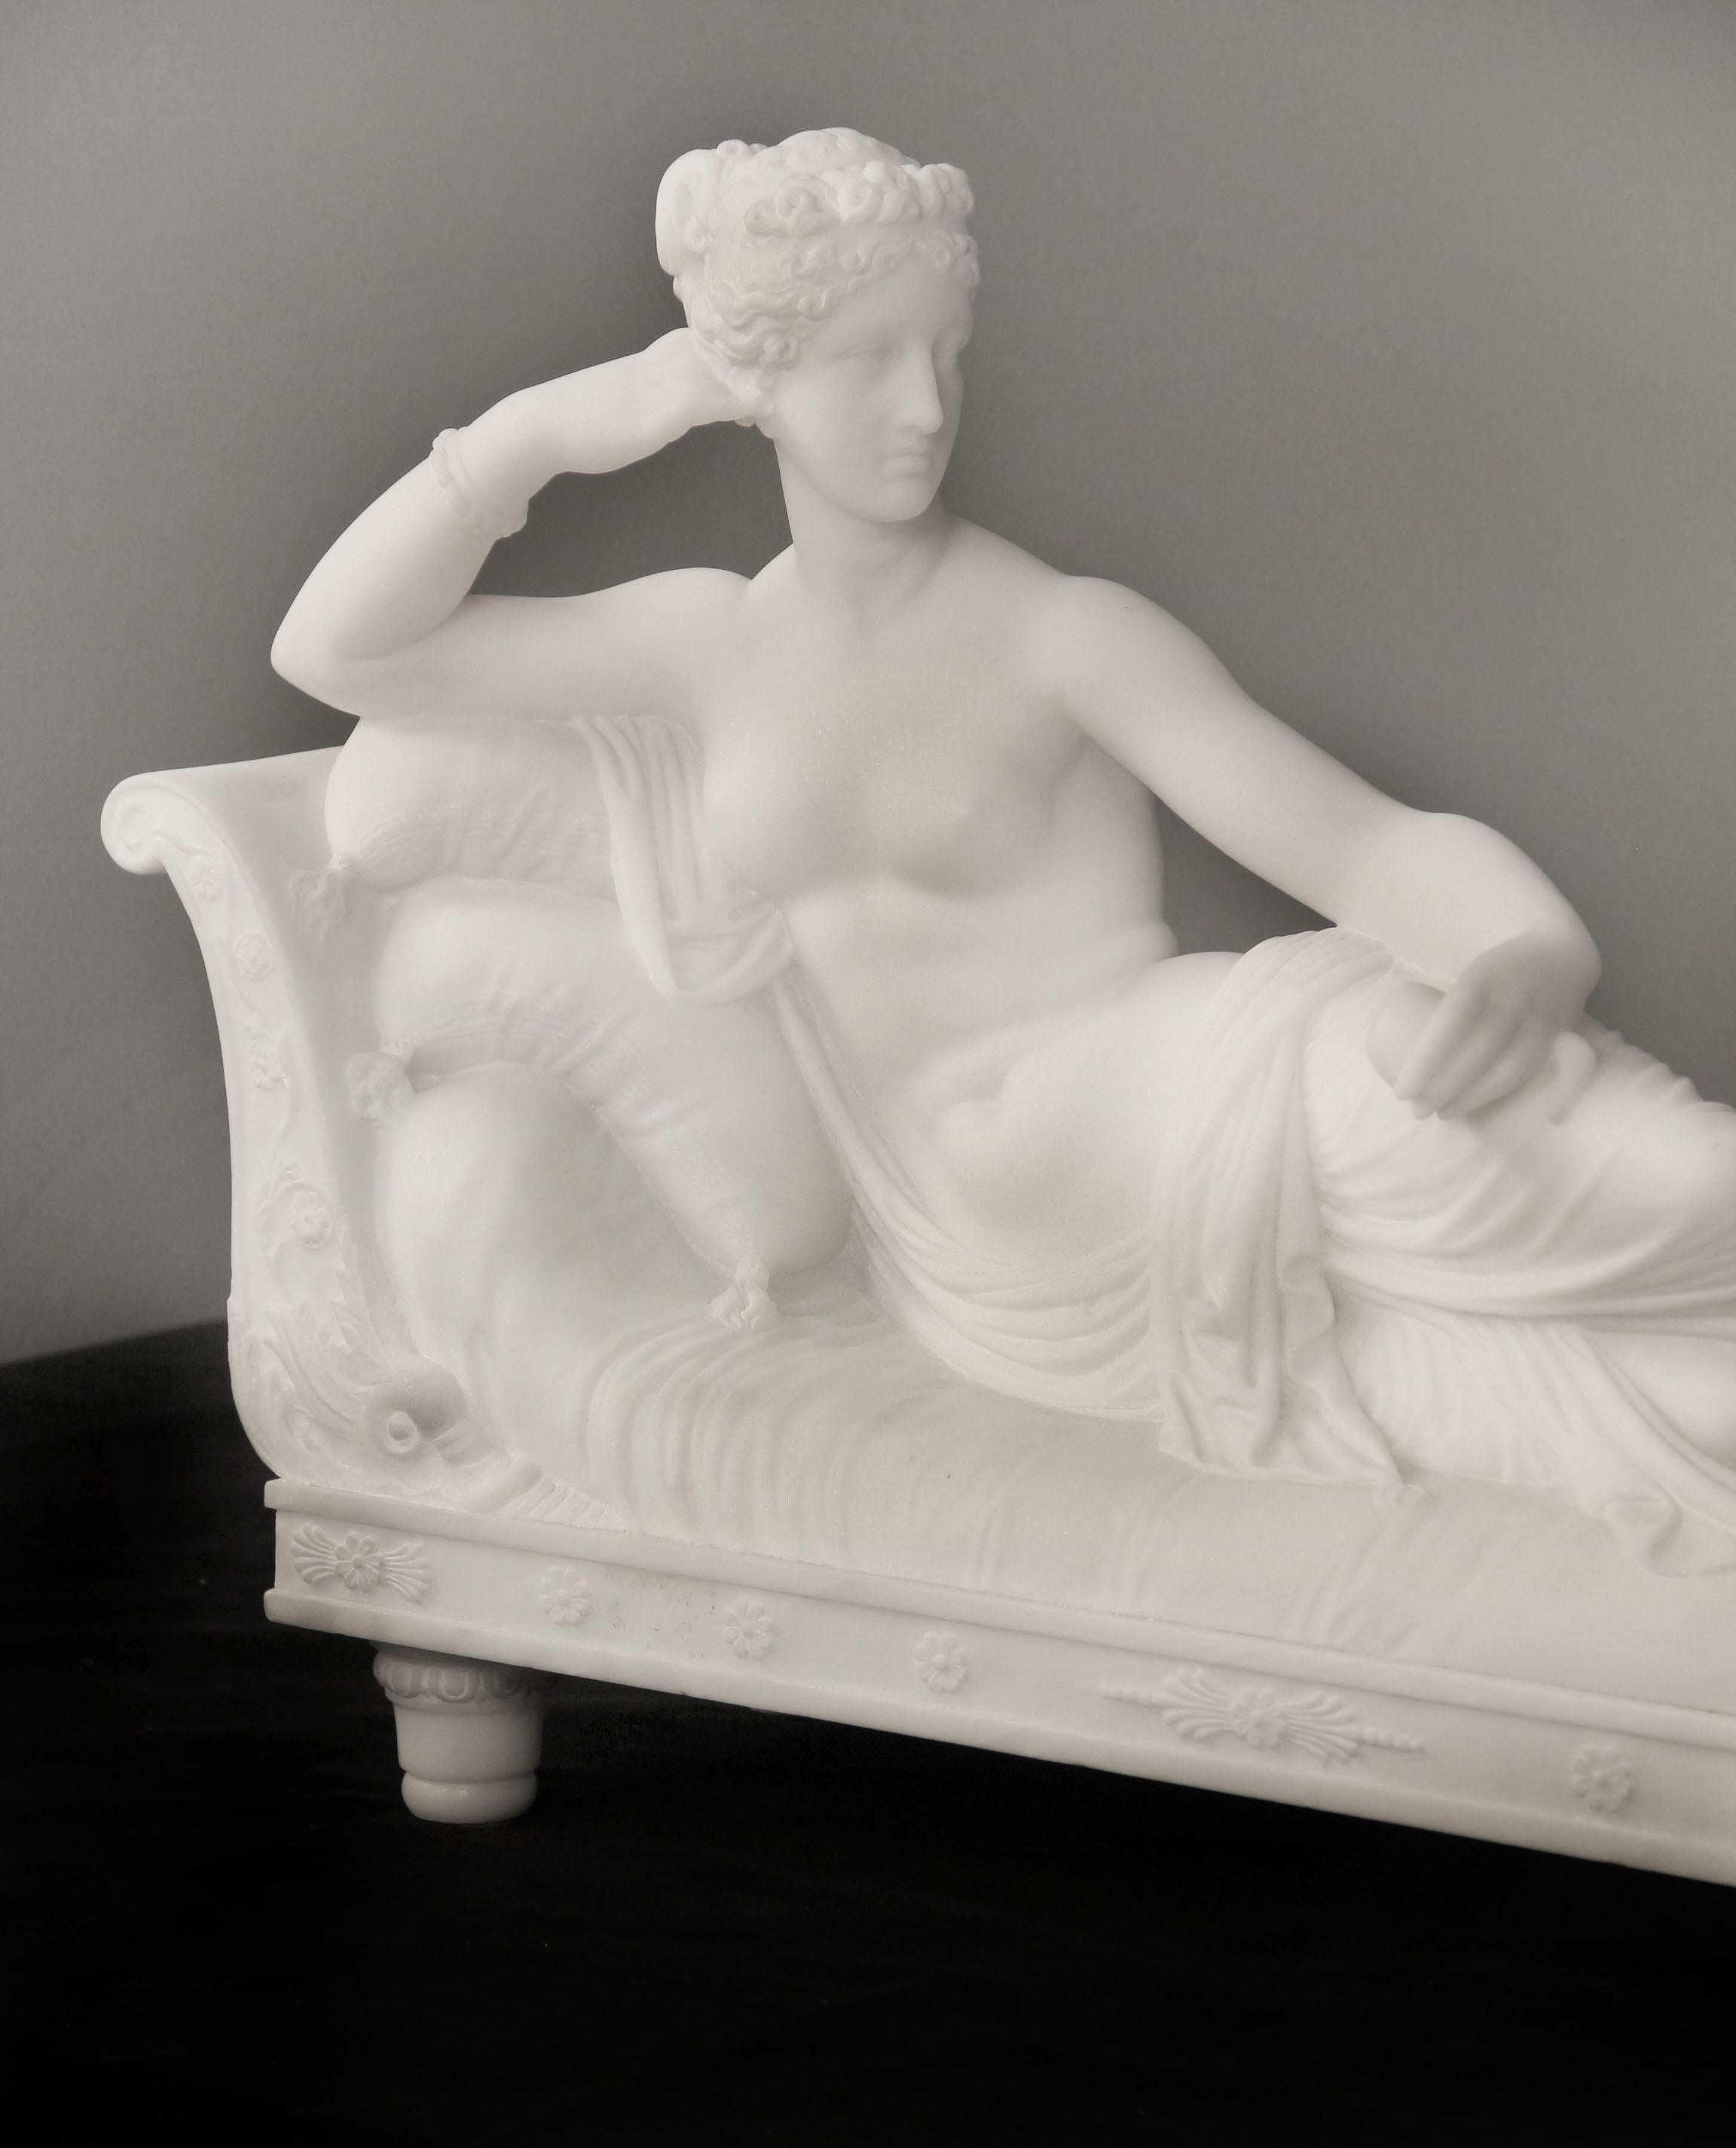 Fantastic Early 20th Century Italian White Carrara Marble of a Nude Woman Reclining

After Pasquale Romanelli

Depicting Paolina Borghese (Napoleon's Sister) as Venus Victrix, after the very famous model by Antonio Canova.

Inscribed 